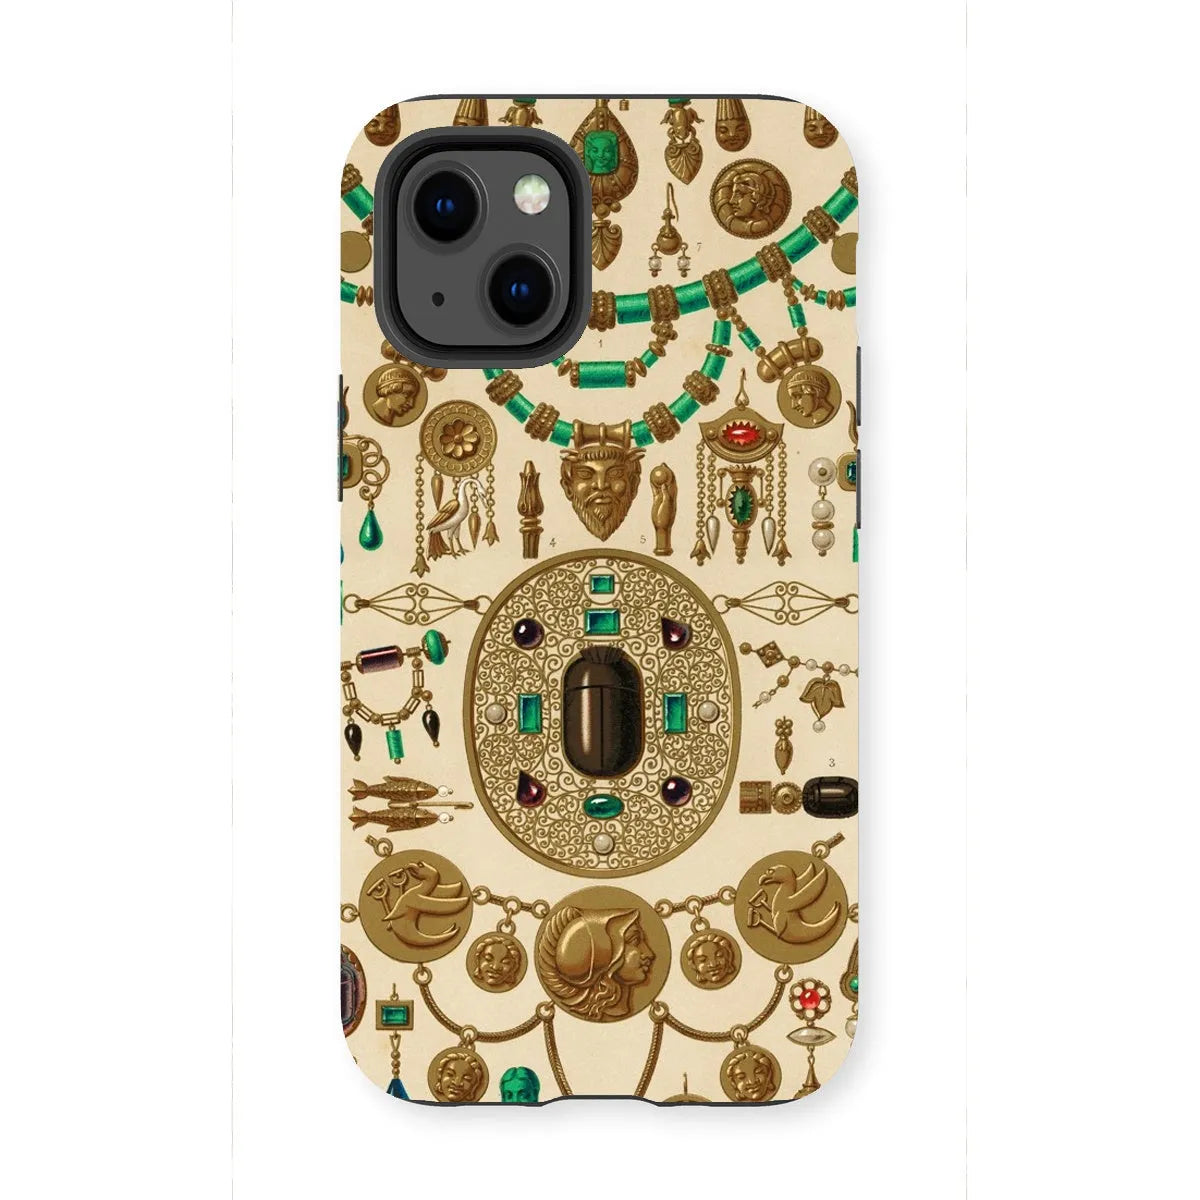 Etruscan Patterns From L’ornement Polychrome By Auguste Racinet Tough Phone Case - Iphone 13 Mini / Matte - Mobile